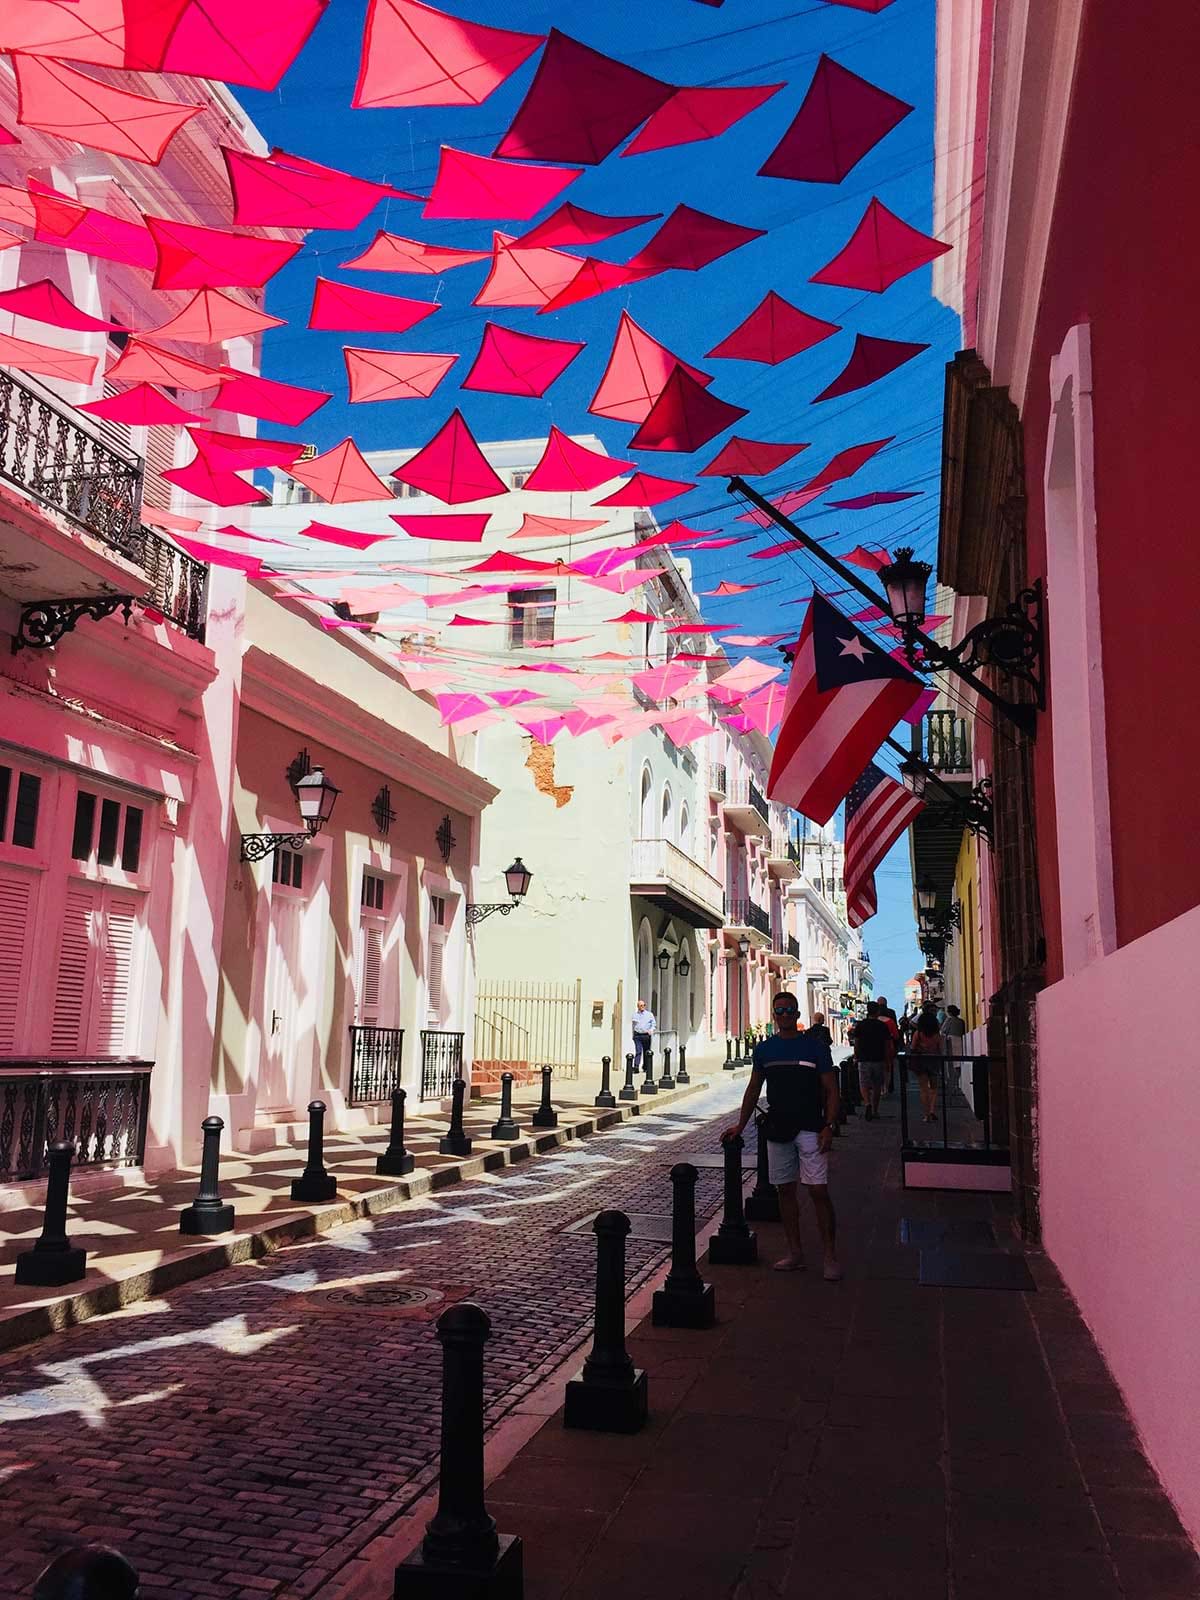 Red and pink flags providing shade over narrow street